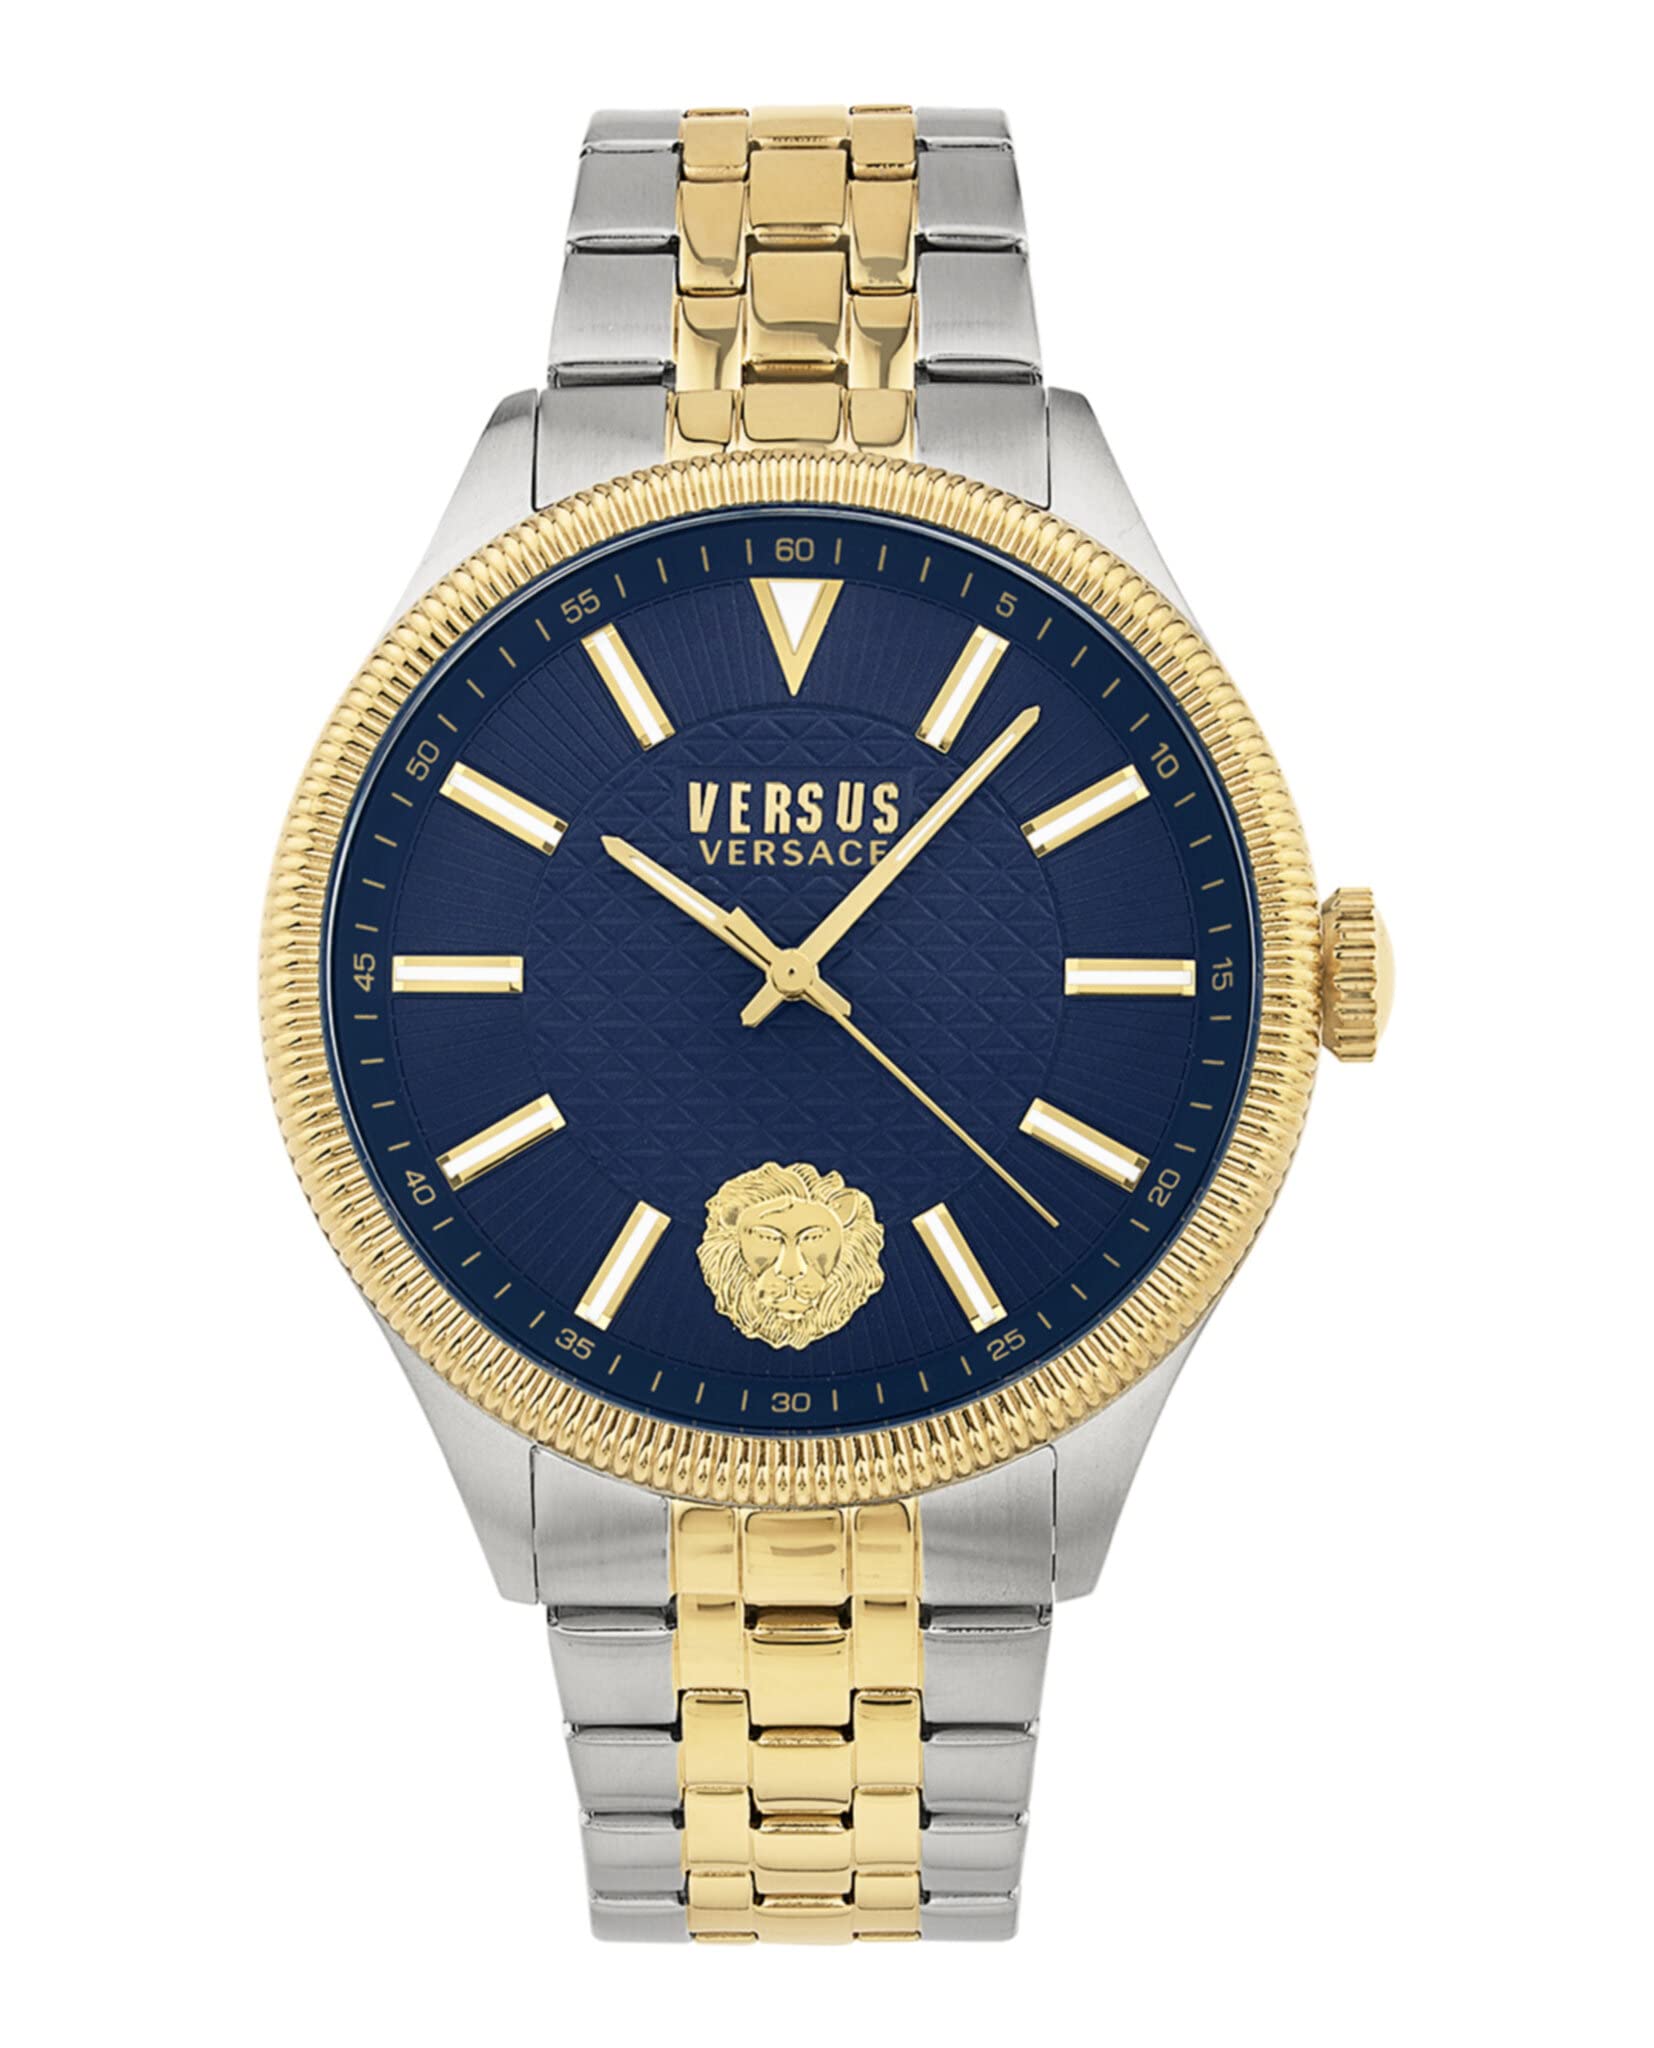 Versus Versace Mens Two Tone Watch. Colonne Collection. Adjustable Two Tone Bracelet Style Strap. Large Blue Dial Face and Go